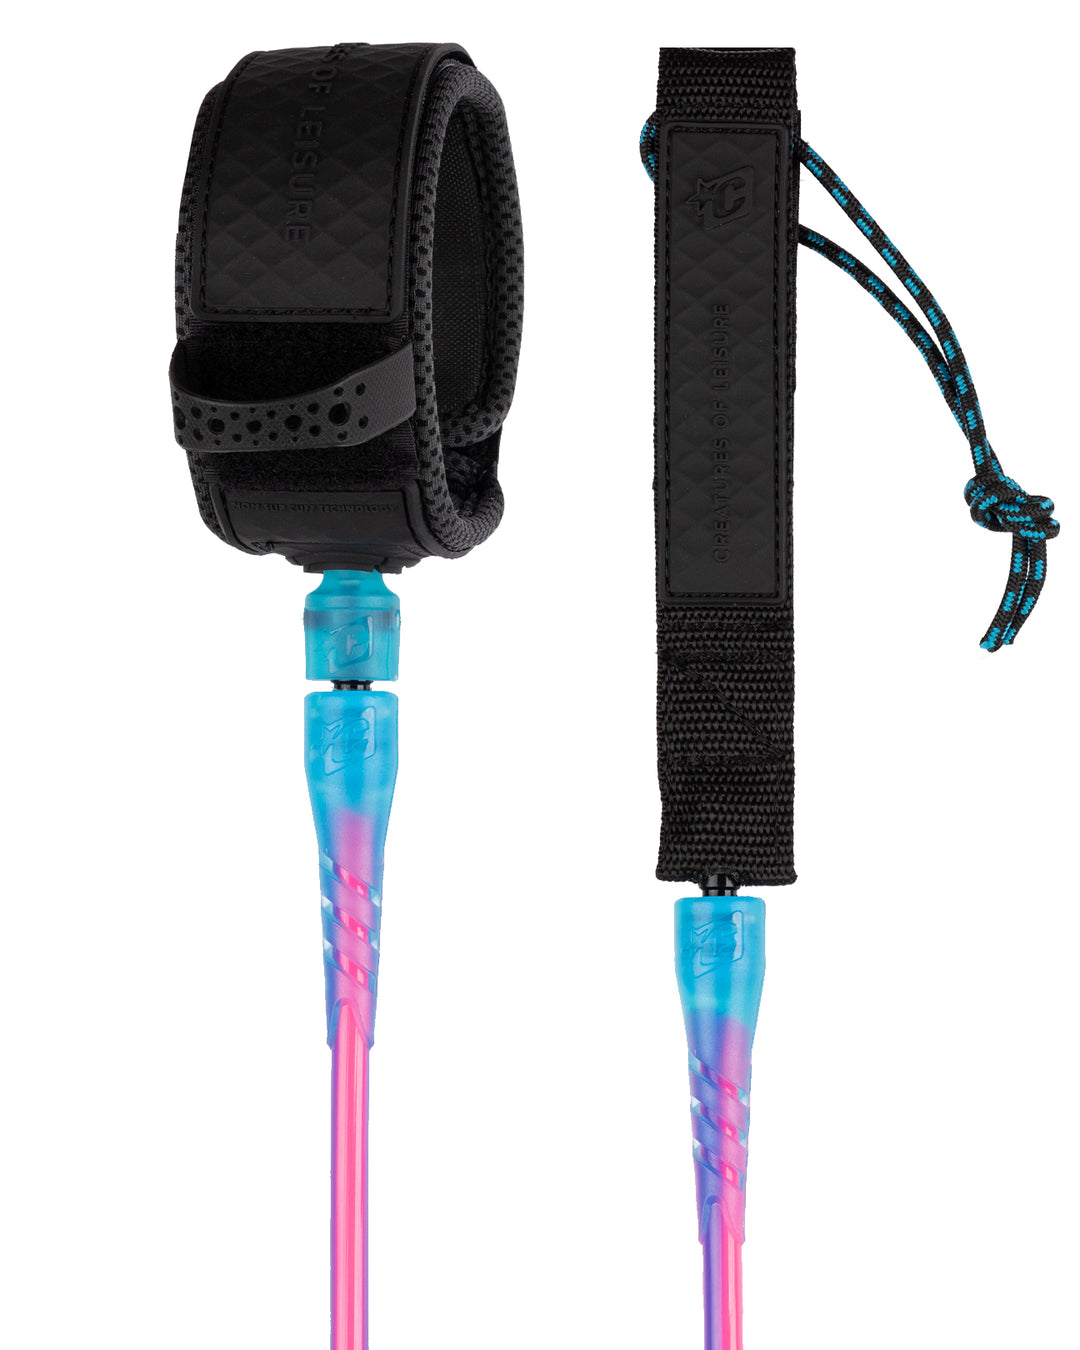 Reliance Lite 6 Leash | Candy Cord Series